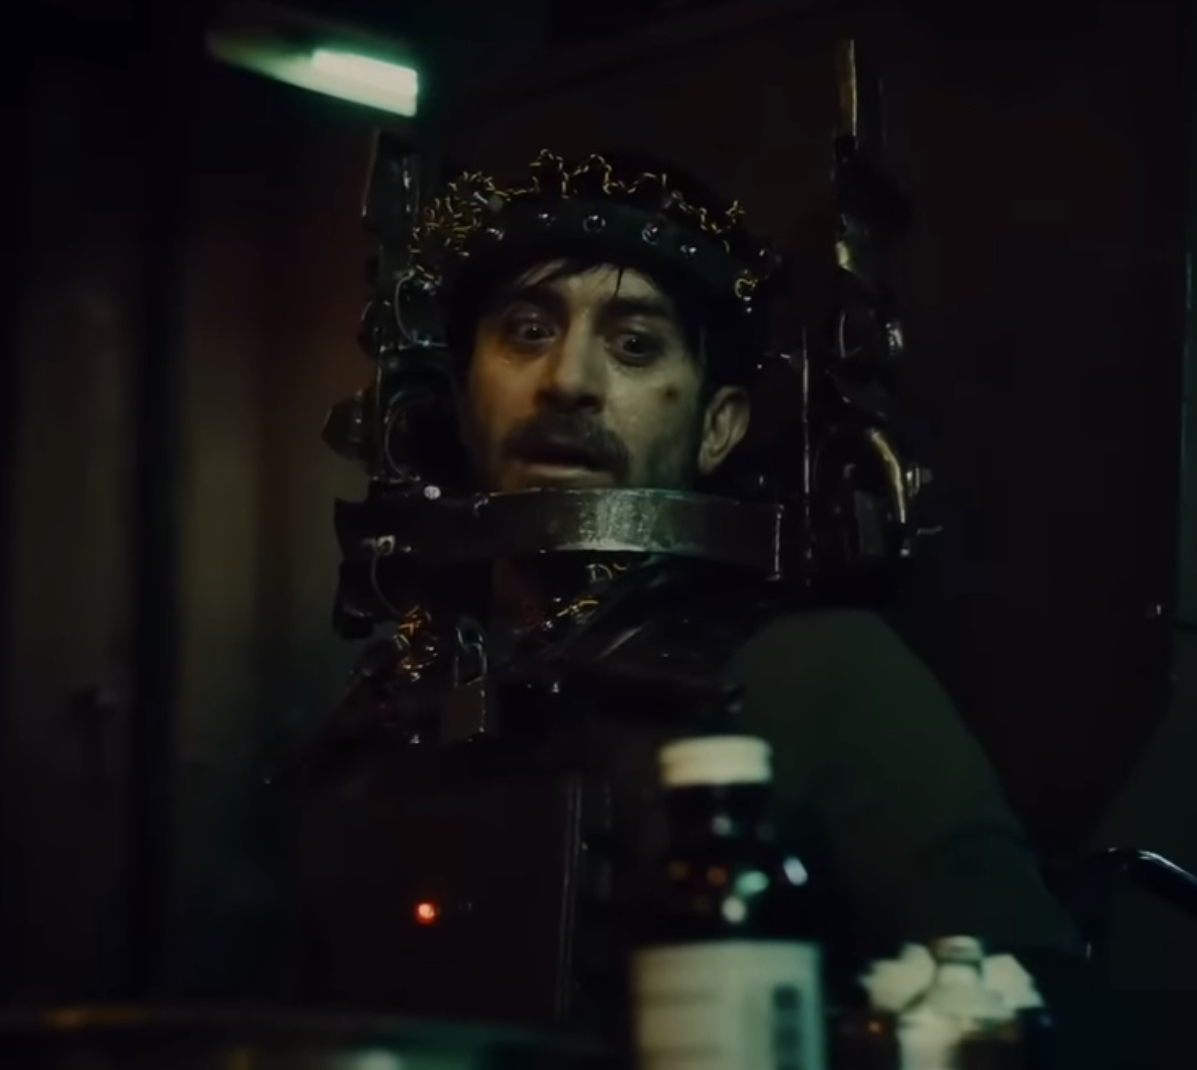 The Brain Surgery Trap. Meteo is strapped to a chair with a helmet connected to electrodes stuck to his head. Mateo must conduct surgery on himself with the help of a monitor showing a feed of his head. He must place the extracted tissue Failure to conduct the surgery will result in heat coils in the mask to melt the victims face. 
